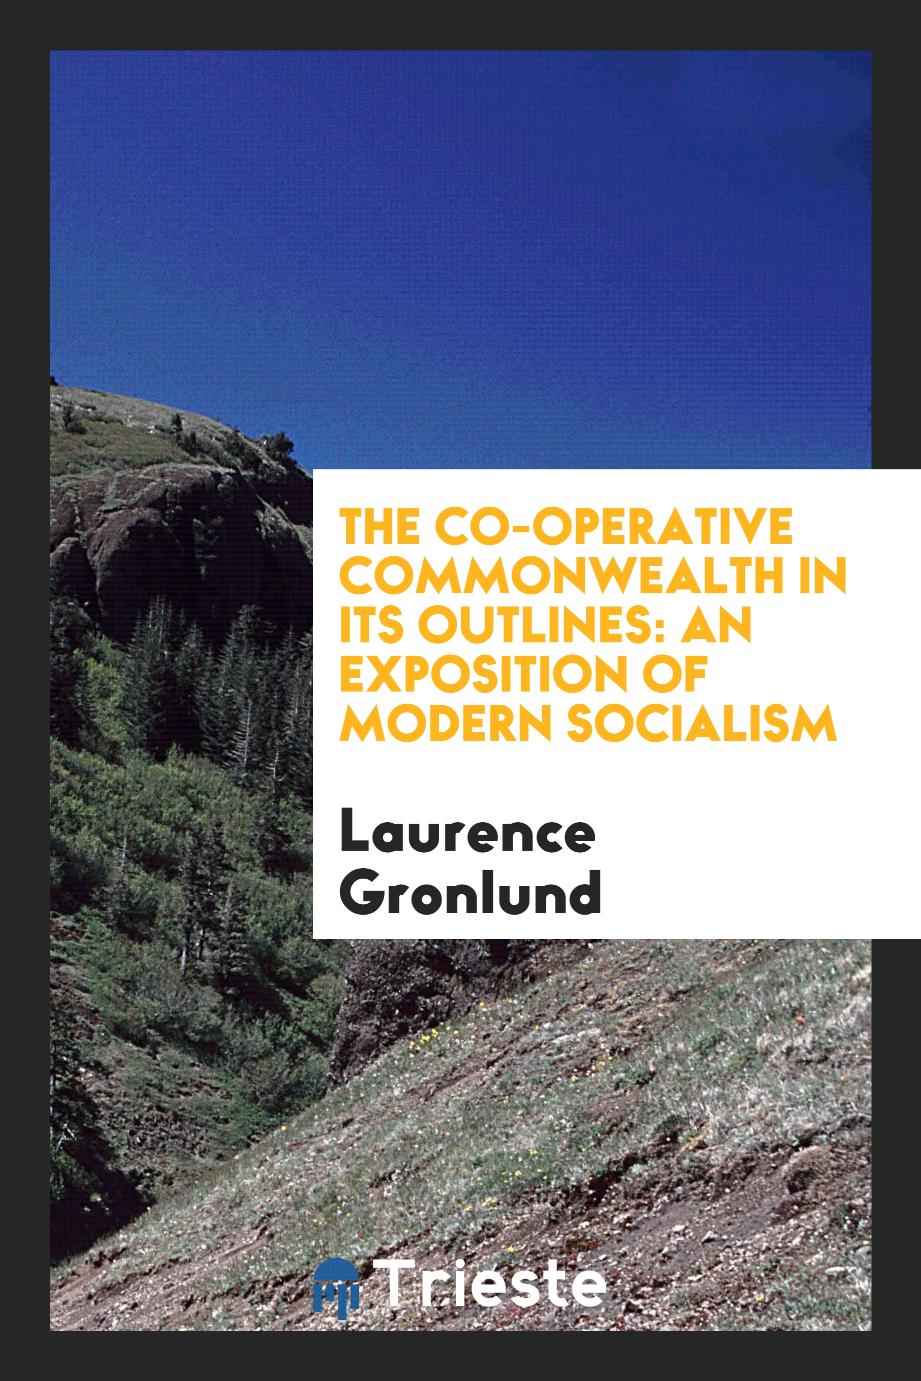 The co-operative commonwealth in its outlines: an exposition of modern socialism